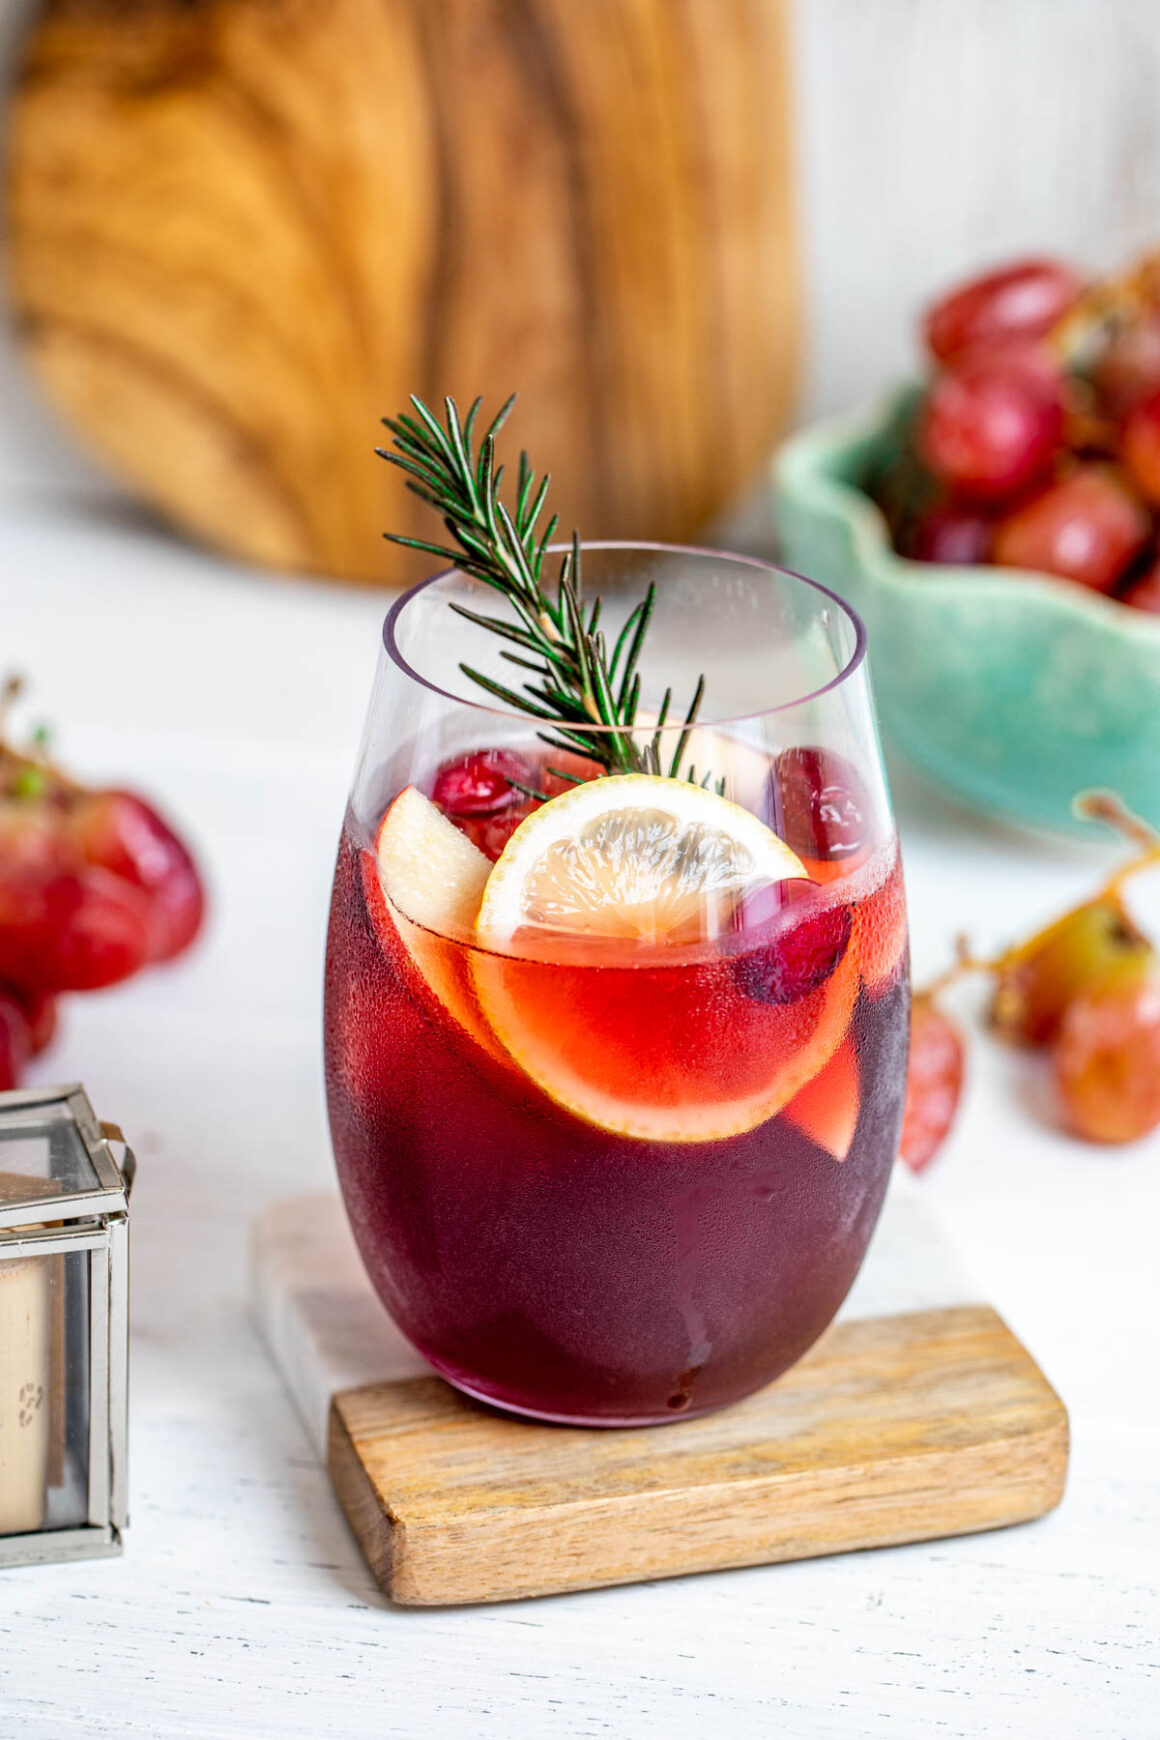 The primary components include red wine, fruits, a sweetener, and a spirit. 